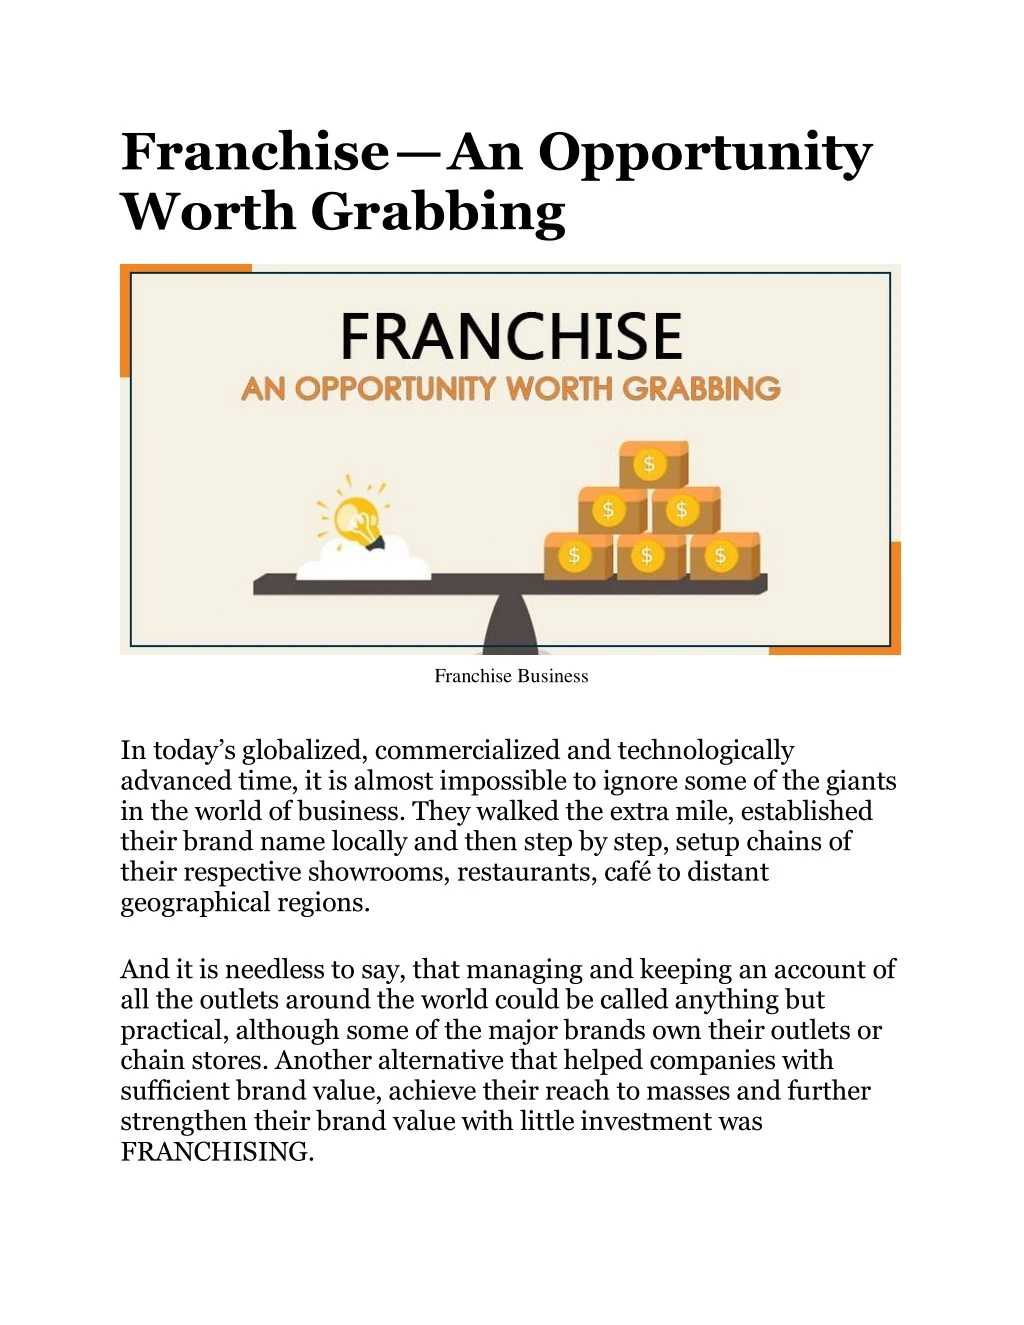 franchise an opportunity worth grabbing